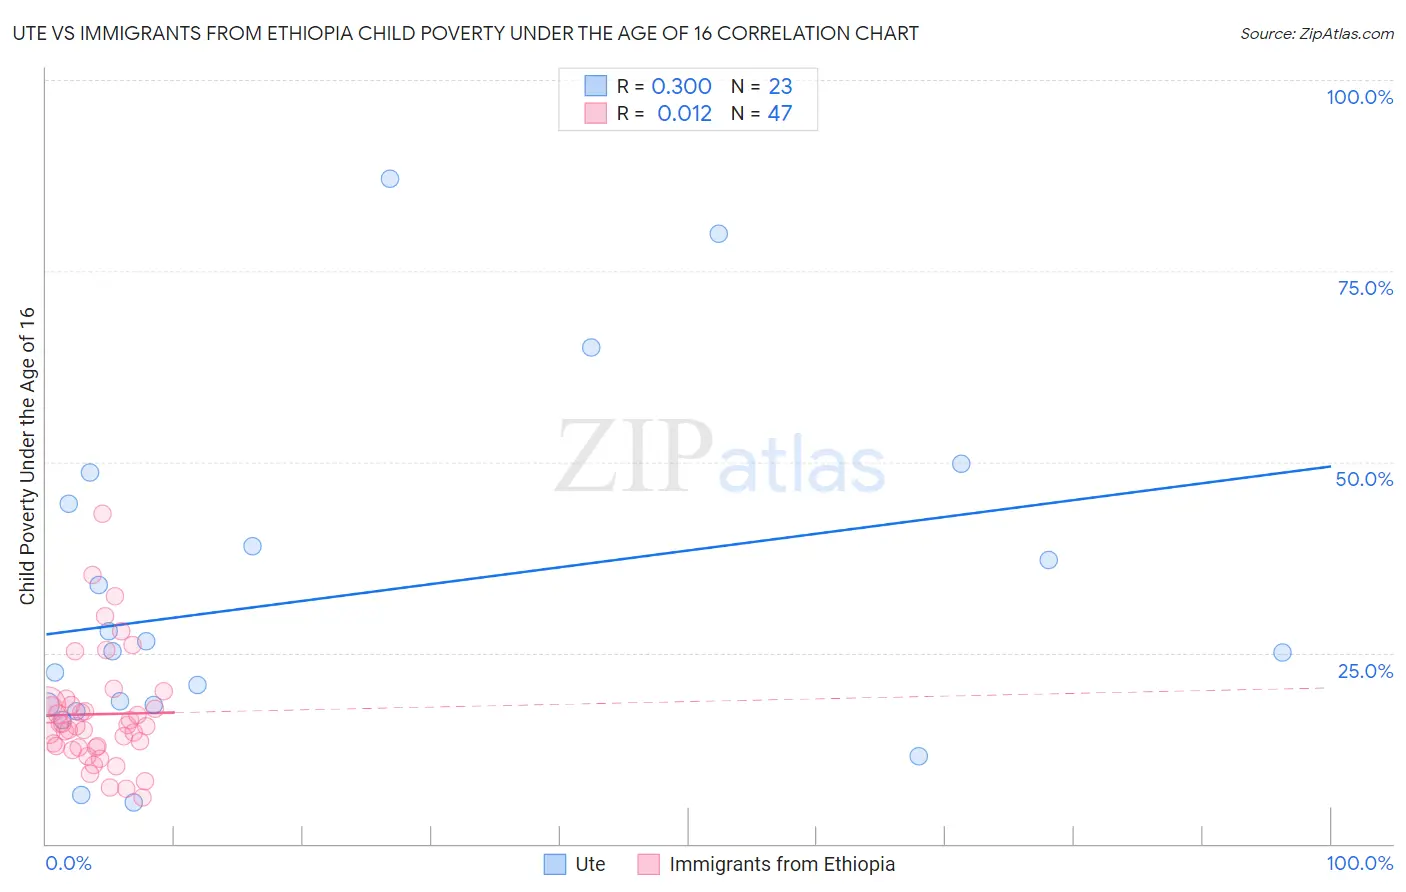 Ute vs Immigrants from Ethiopia Child Poverty Under the Age of 16